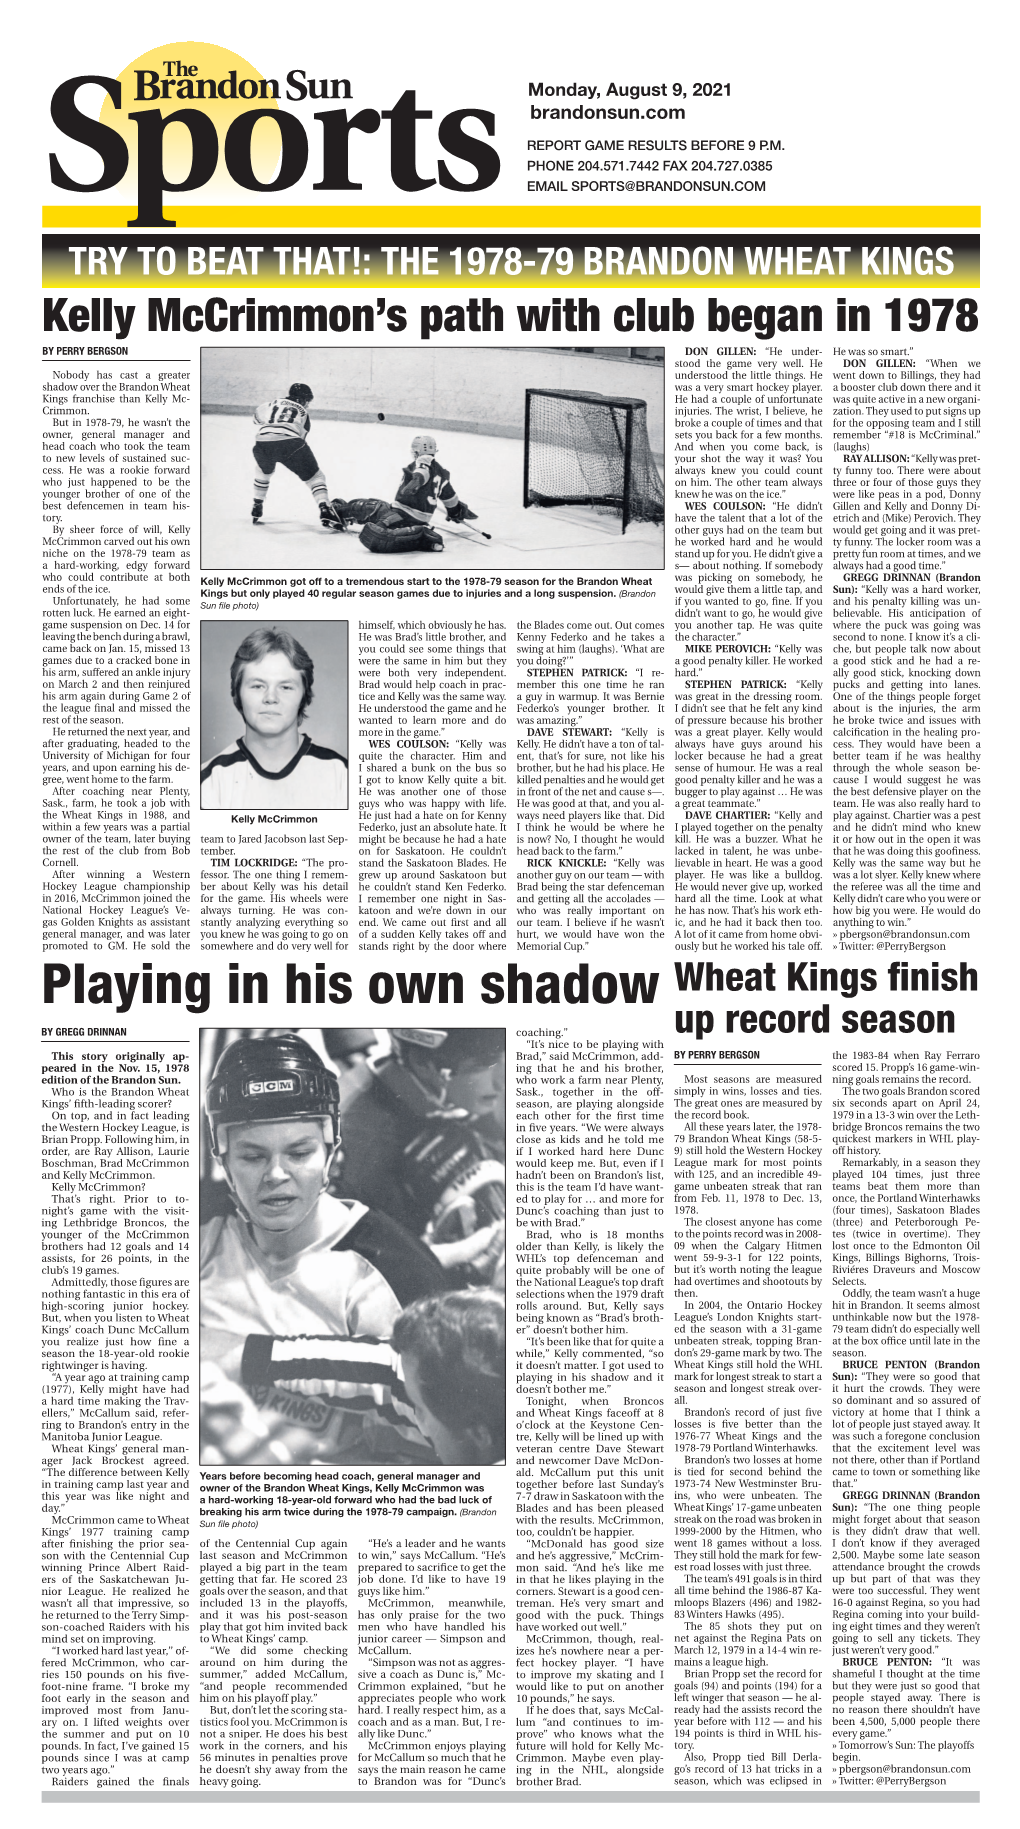 THE 1978-79 BRANDON WHEAT KINGS Kelly Mccrimmon’S Path with Club Began in 1978 by PERRY BERGSON DON GILLEN: “He Under- He Was So Smart.” Stood the Game Very Well